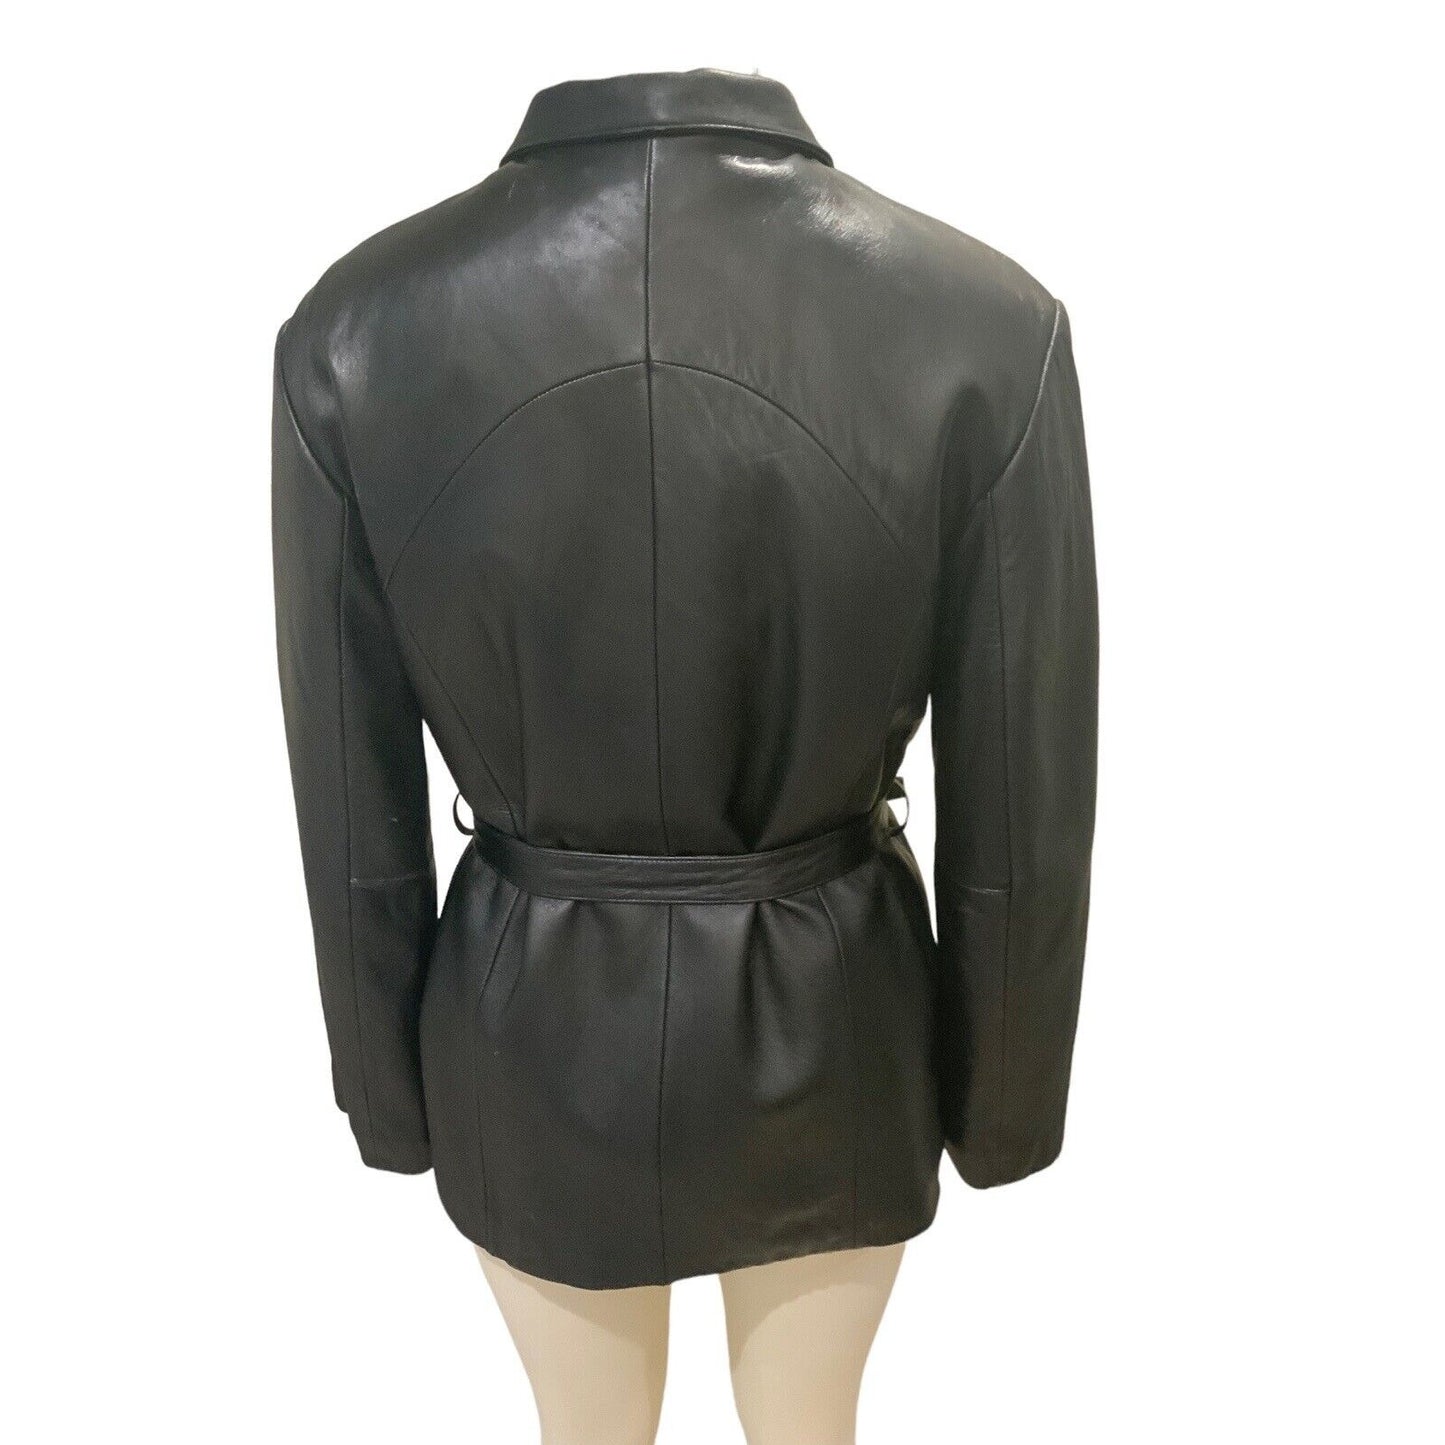 Back View Of Women's Leather Jacket With Zip Out Lining